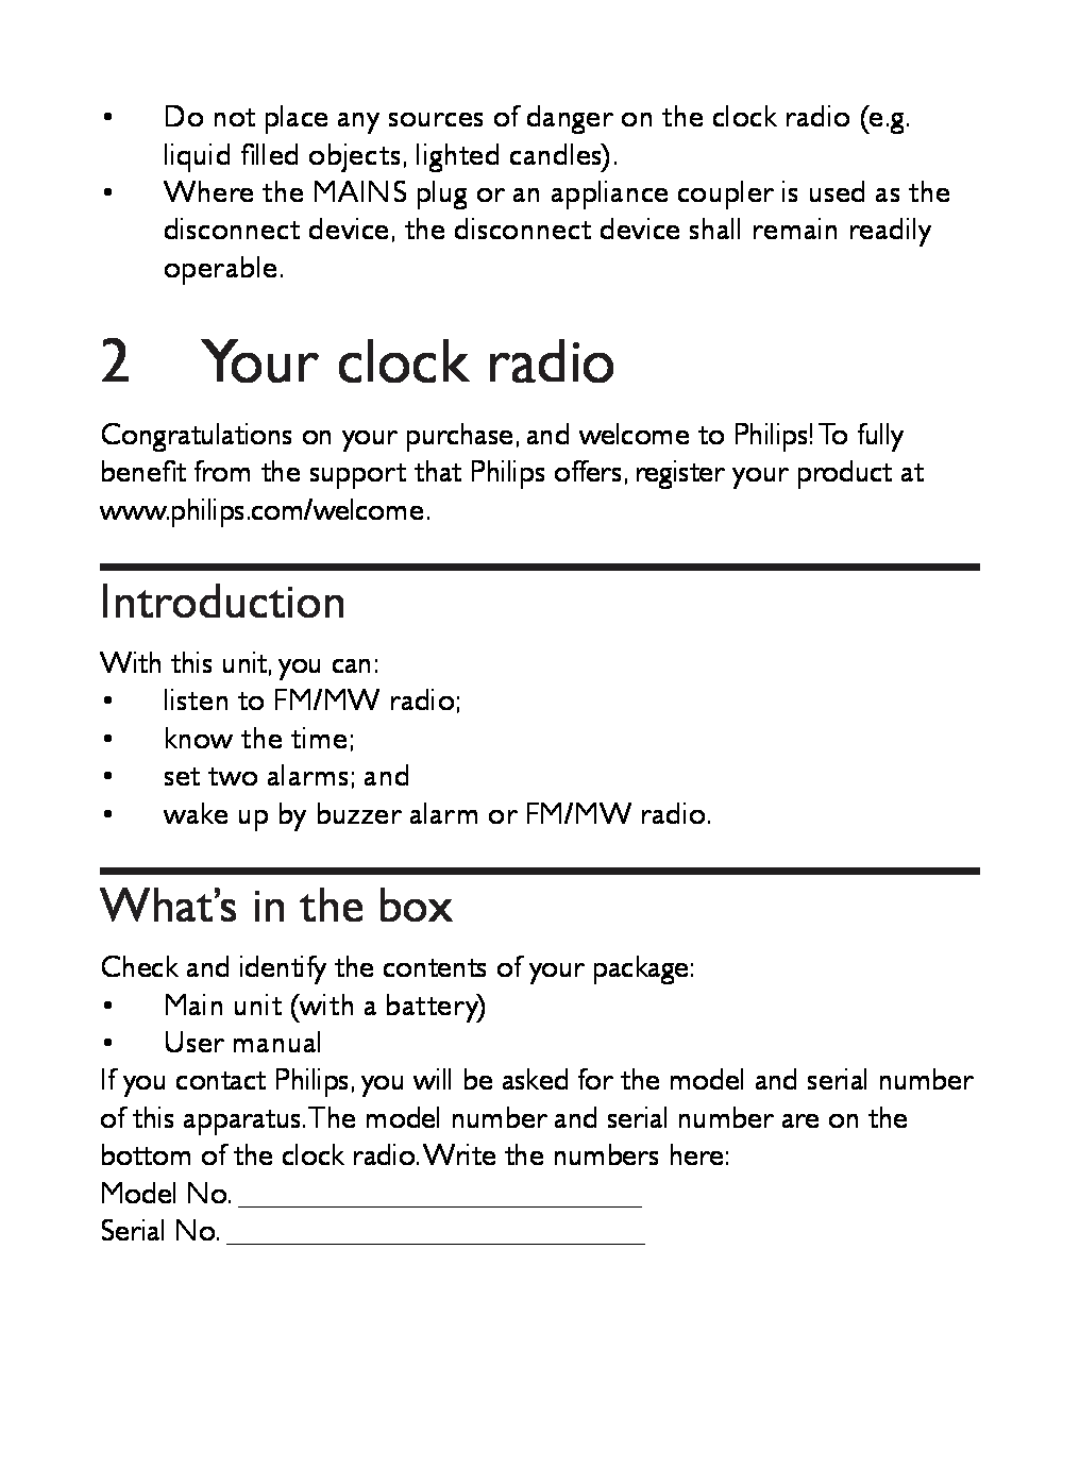 Philips AJ3500 user manual Your clock radio, Introduction, What’s in the box 